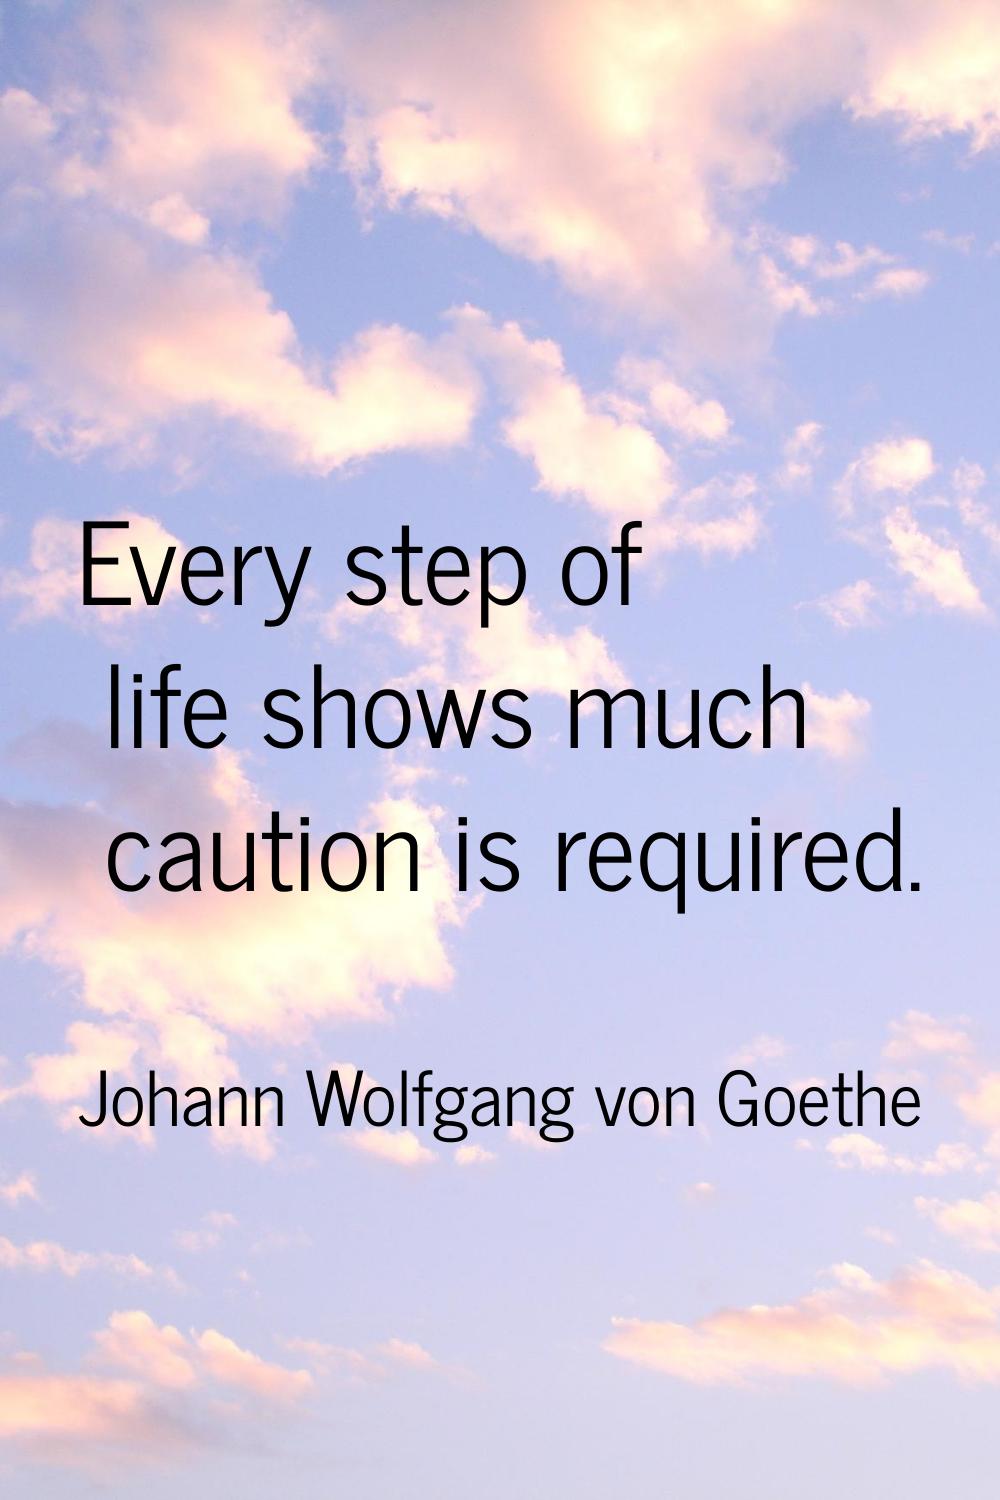 Every step of life shows much caution is required.